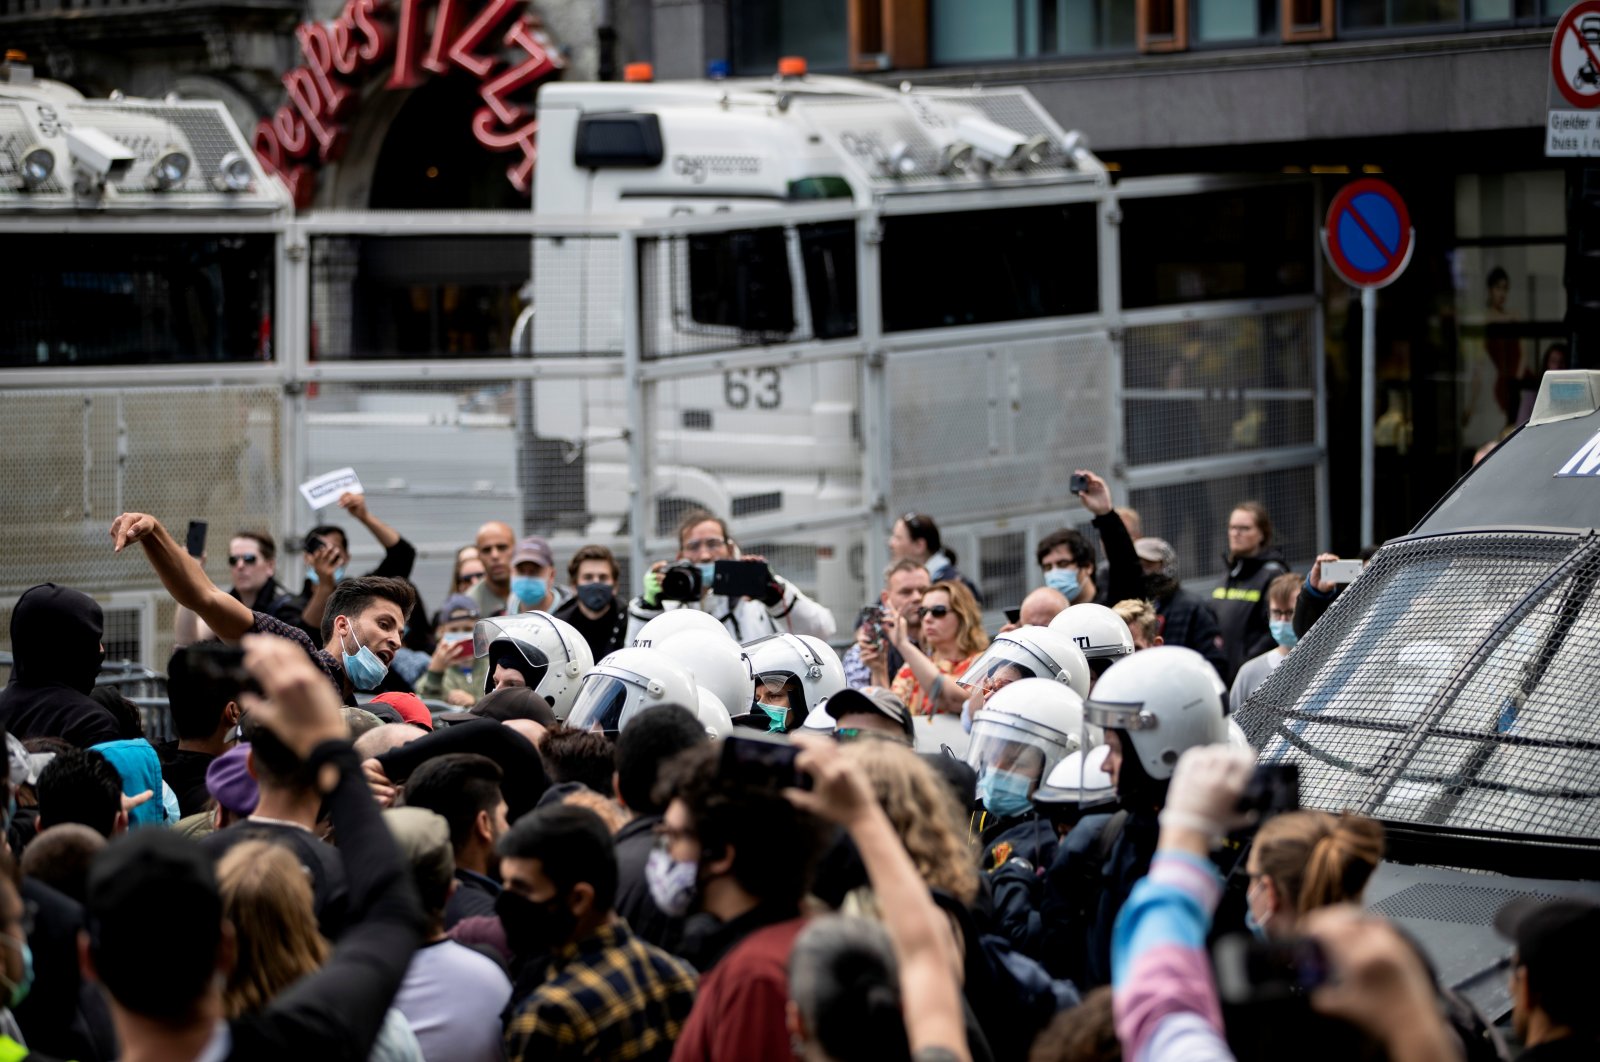 Police separate Stop the Islamization of Norway (SIAN) supporters and counter-protesters as the organization holds a rally in Oslo's city center, Norway on Aug. 29, 2020. (Reuters Photo)